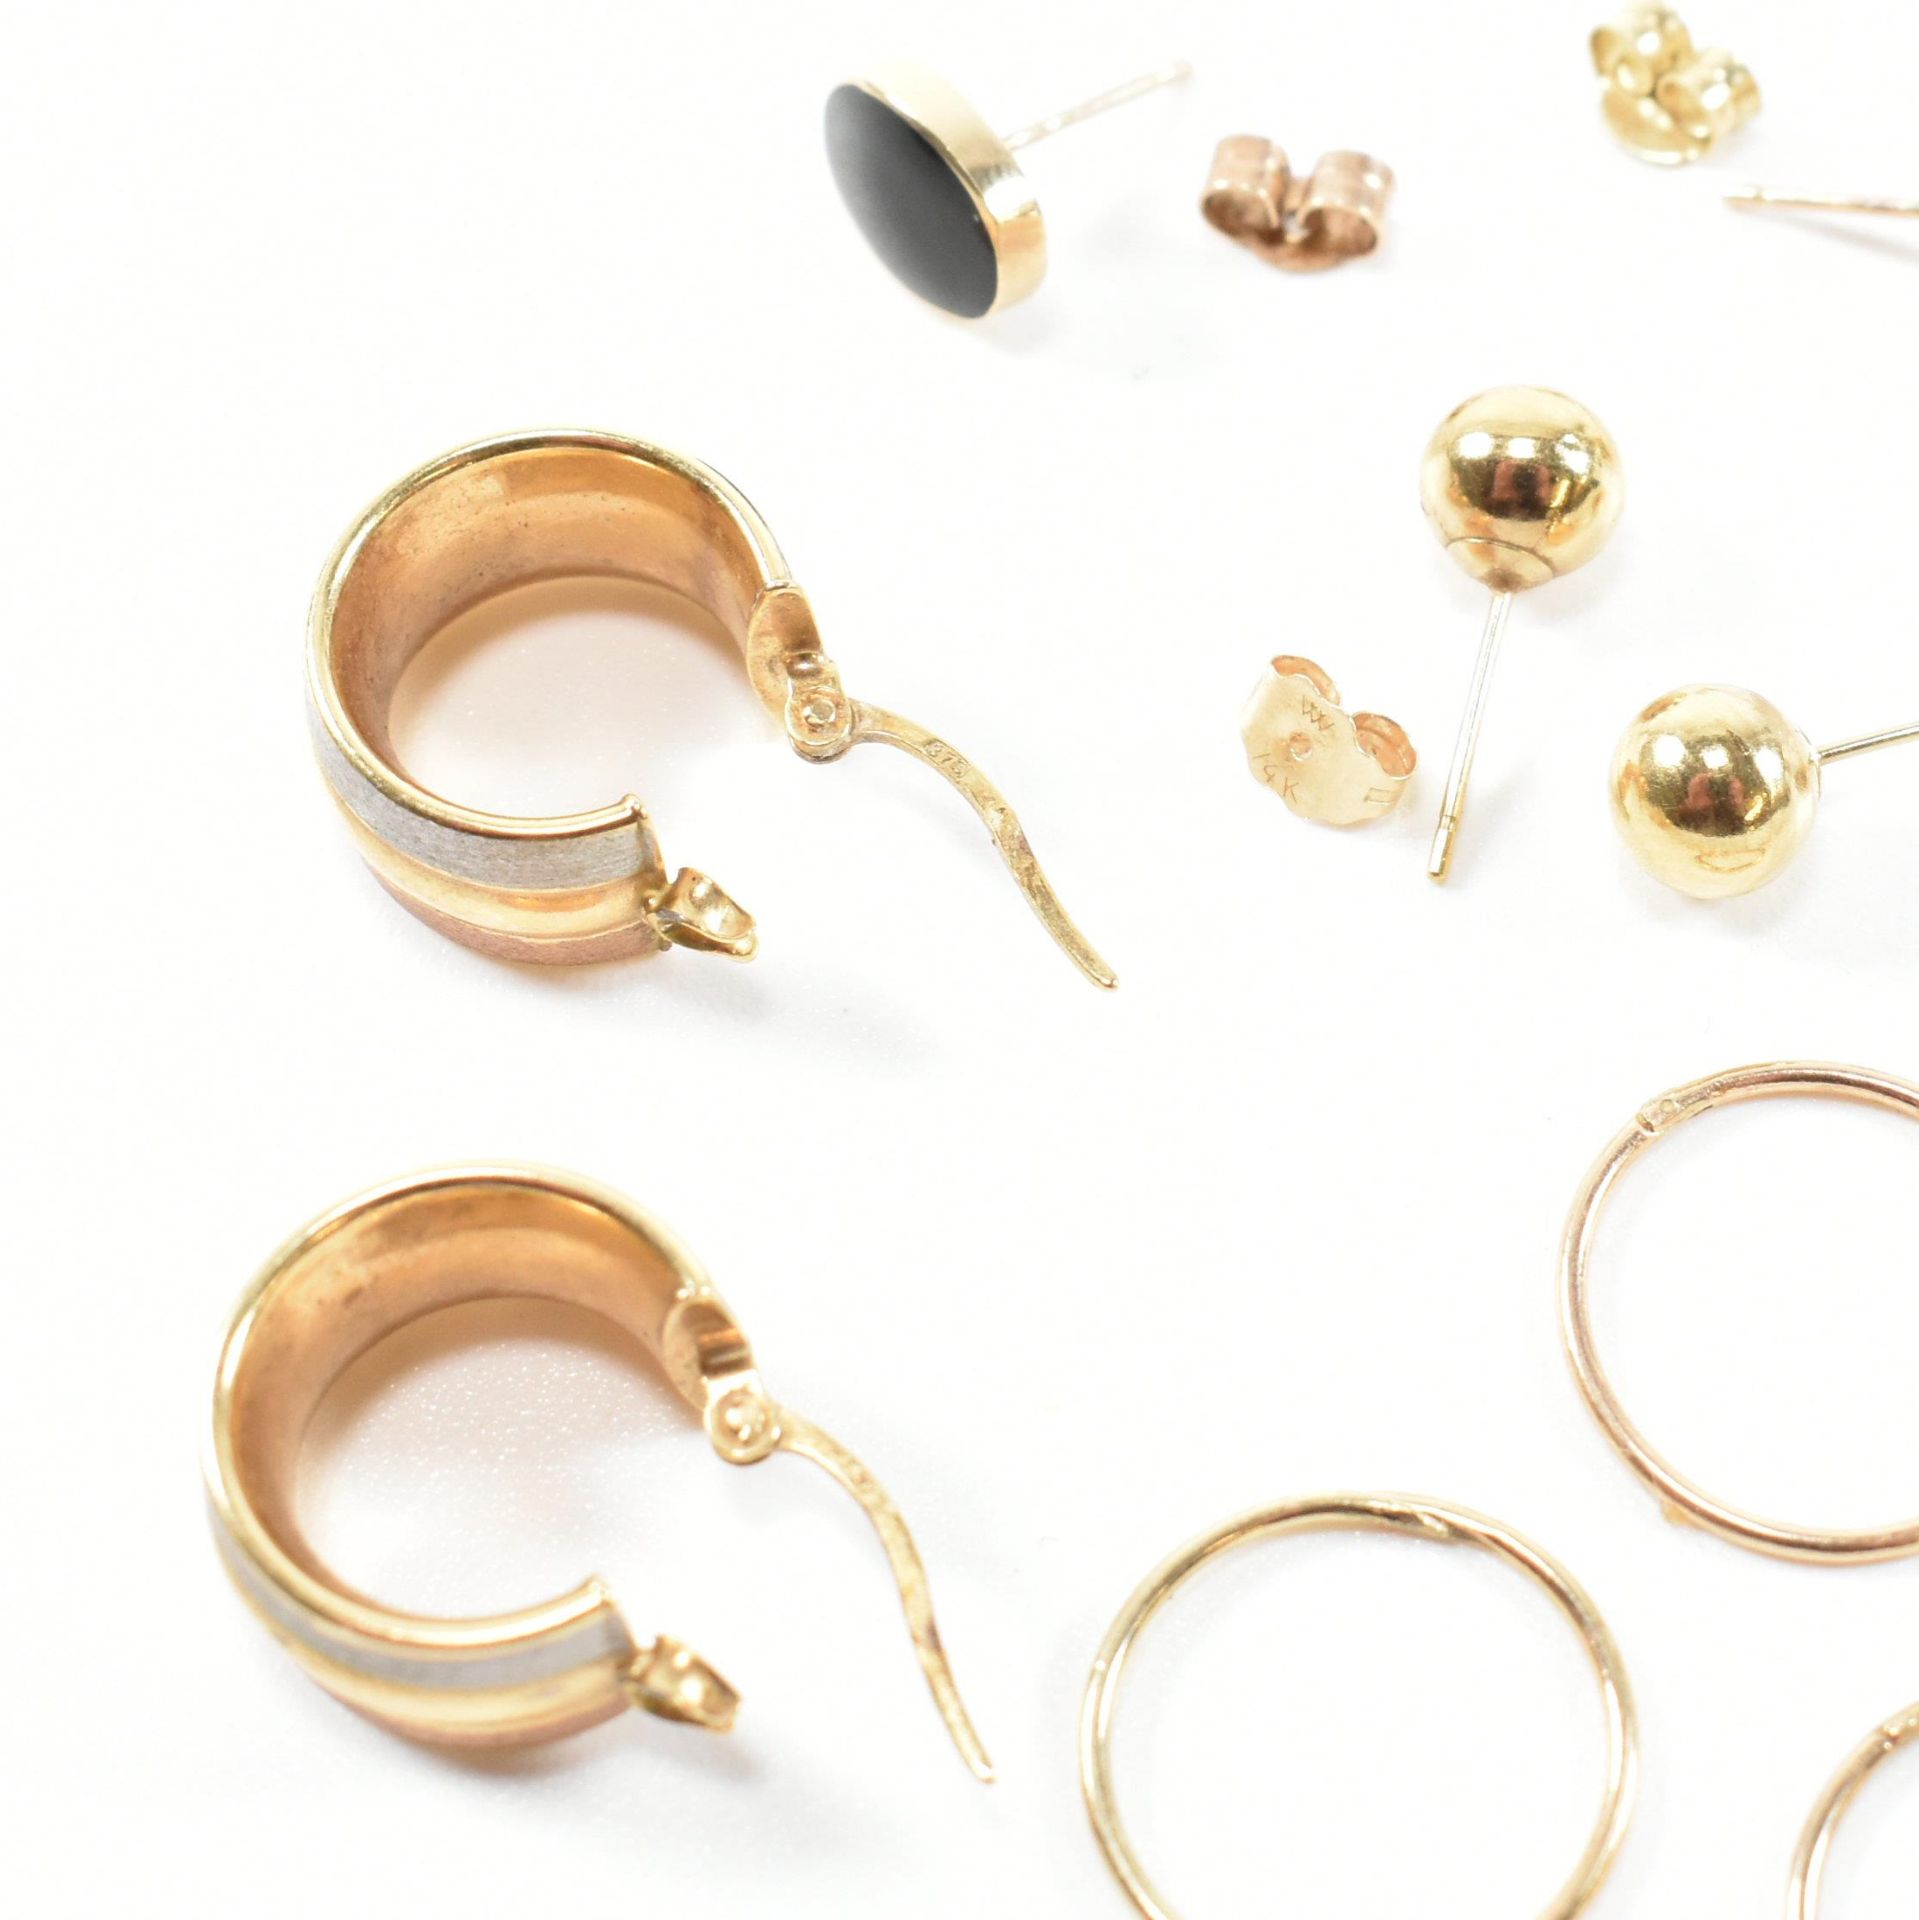 COLLECTION OF 9CT GOLD HOOP & STUD EARRINGS - Image 5 of 7